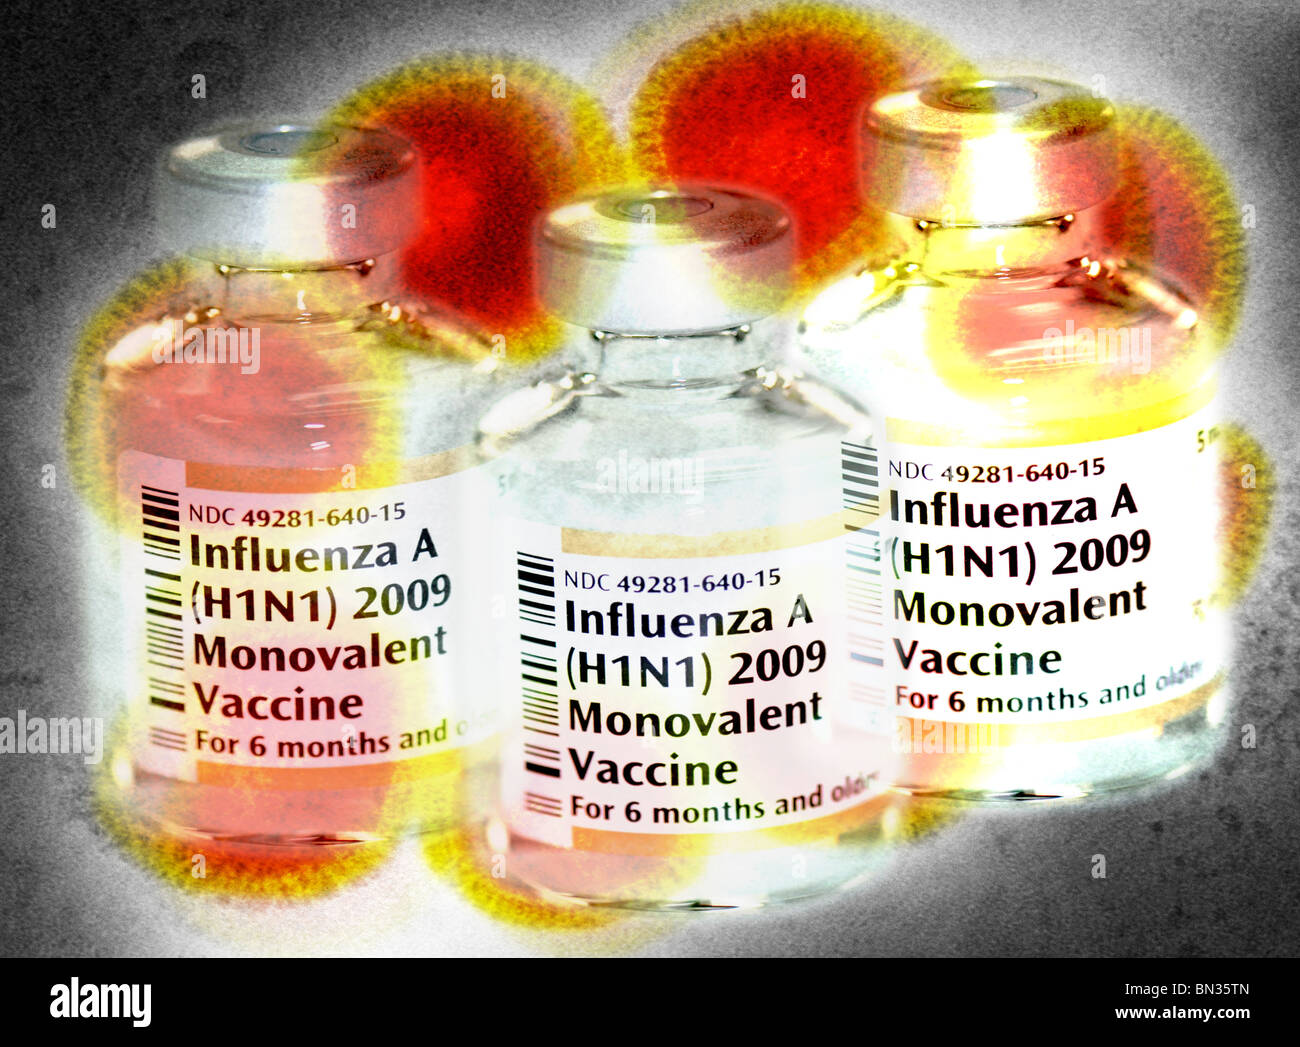 vials of the 2009 H1N1 swine flu vaccine superimposed on a transmission electron micrograph of the H1N1 virus Stock Photo